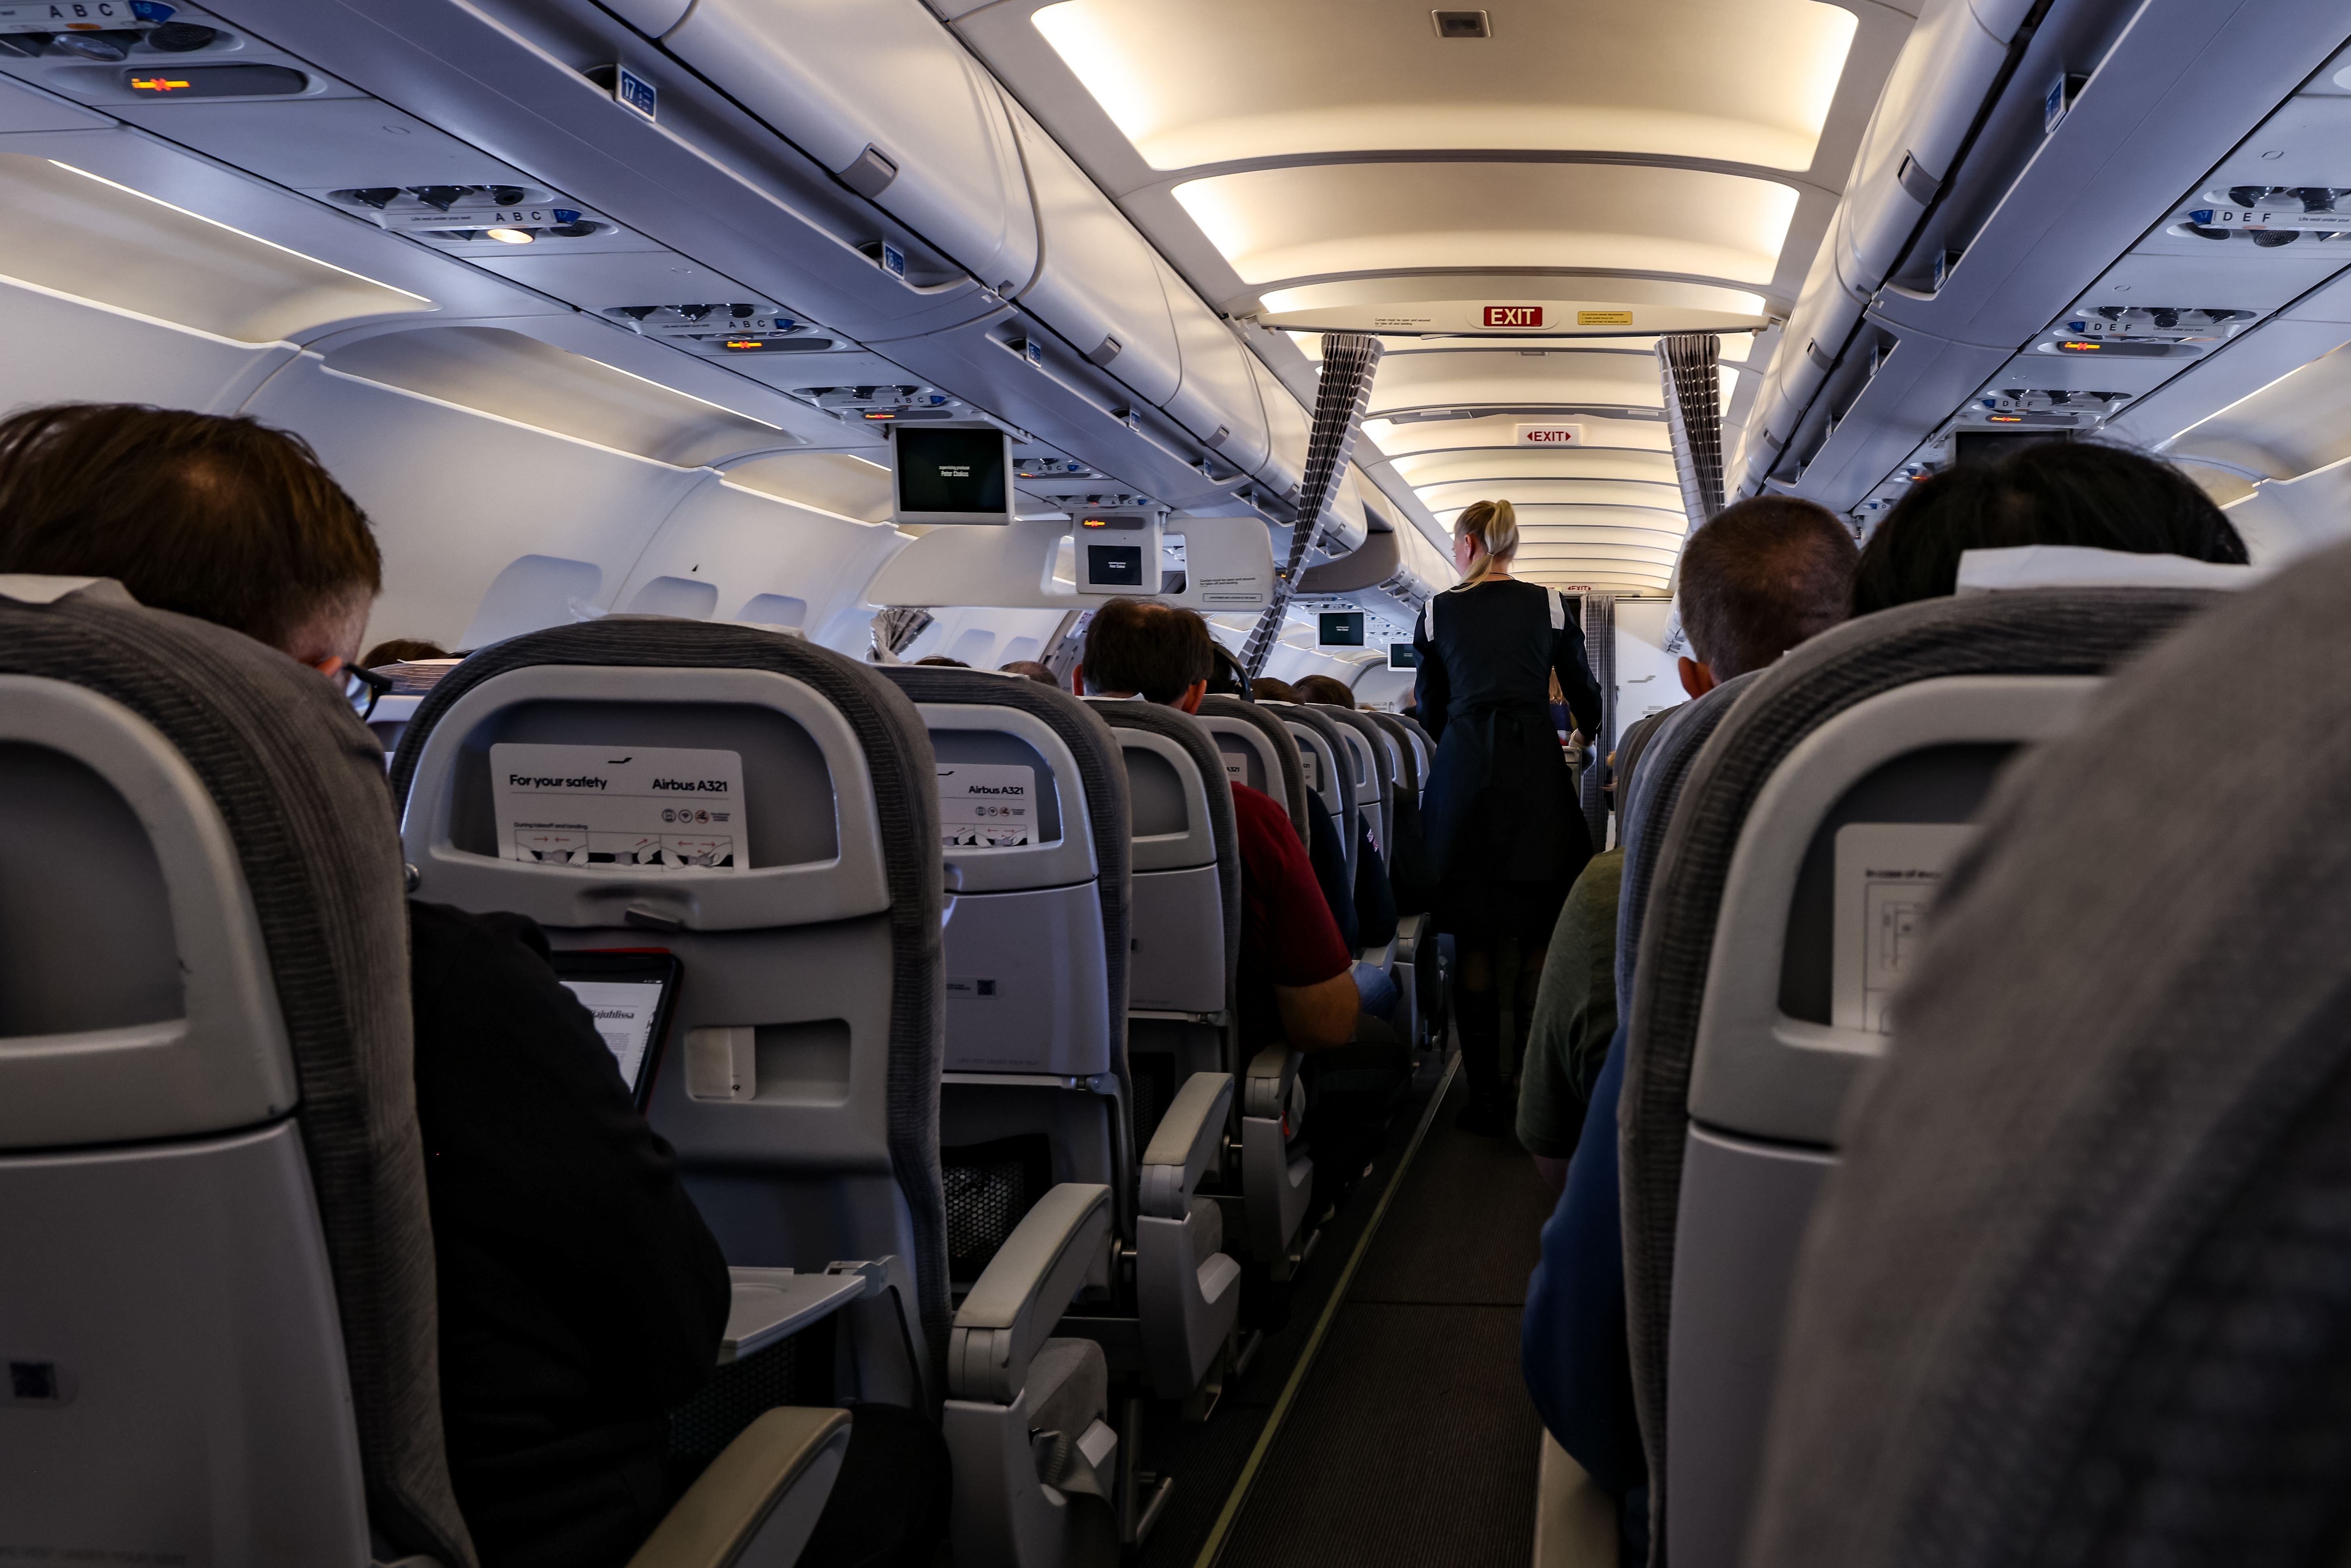 A plane with passengers | Source: Shutterstock